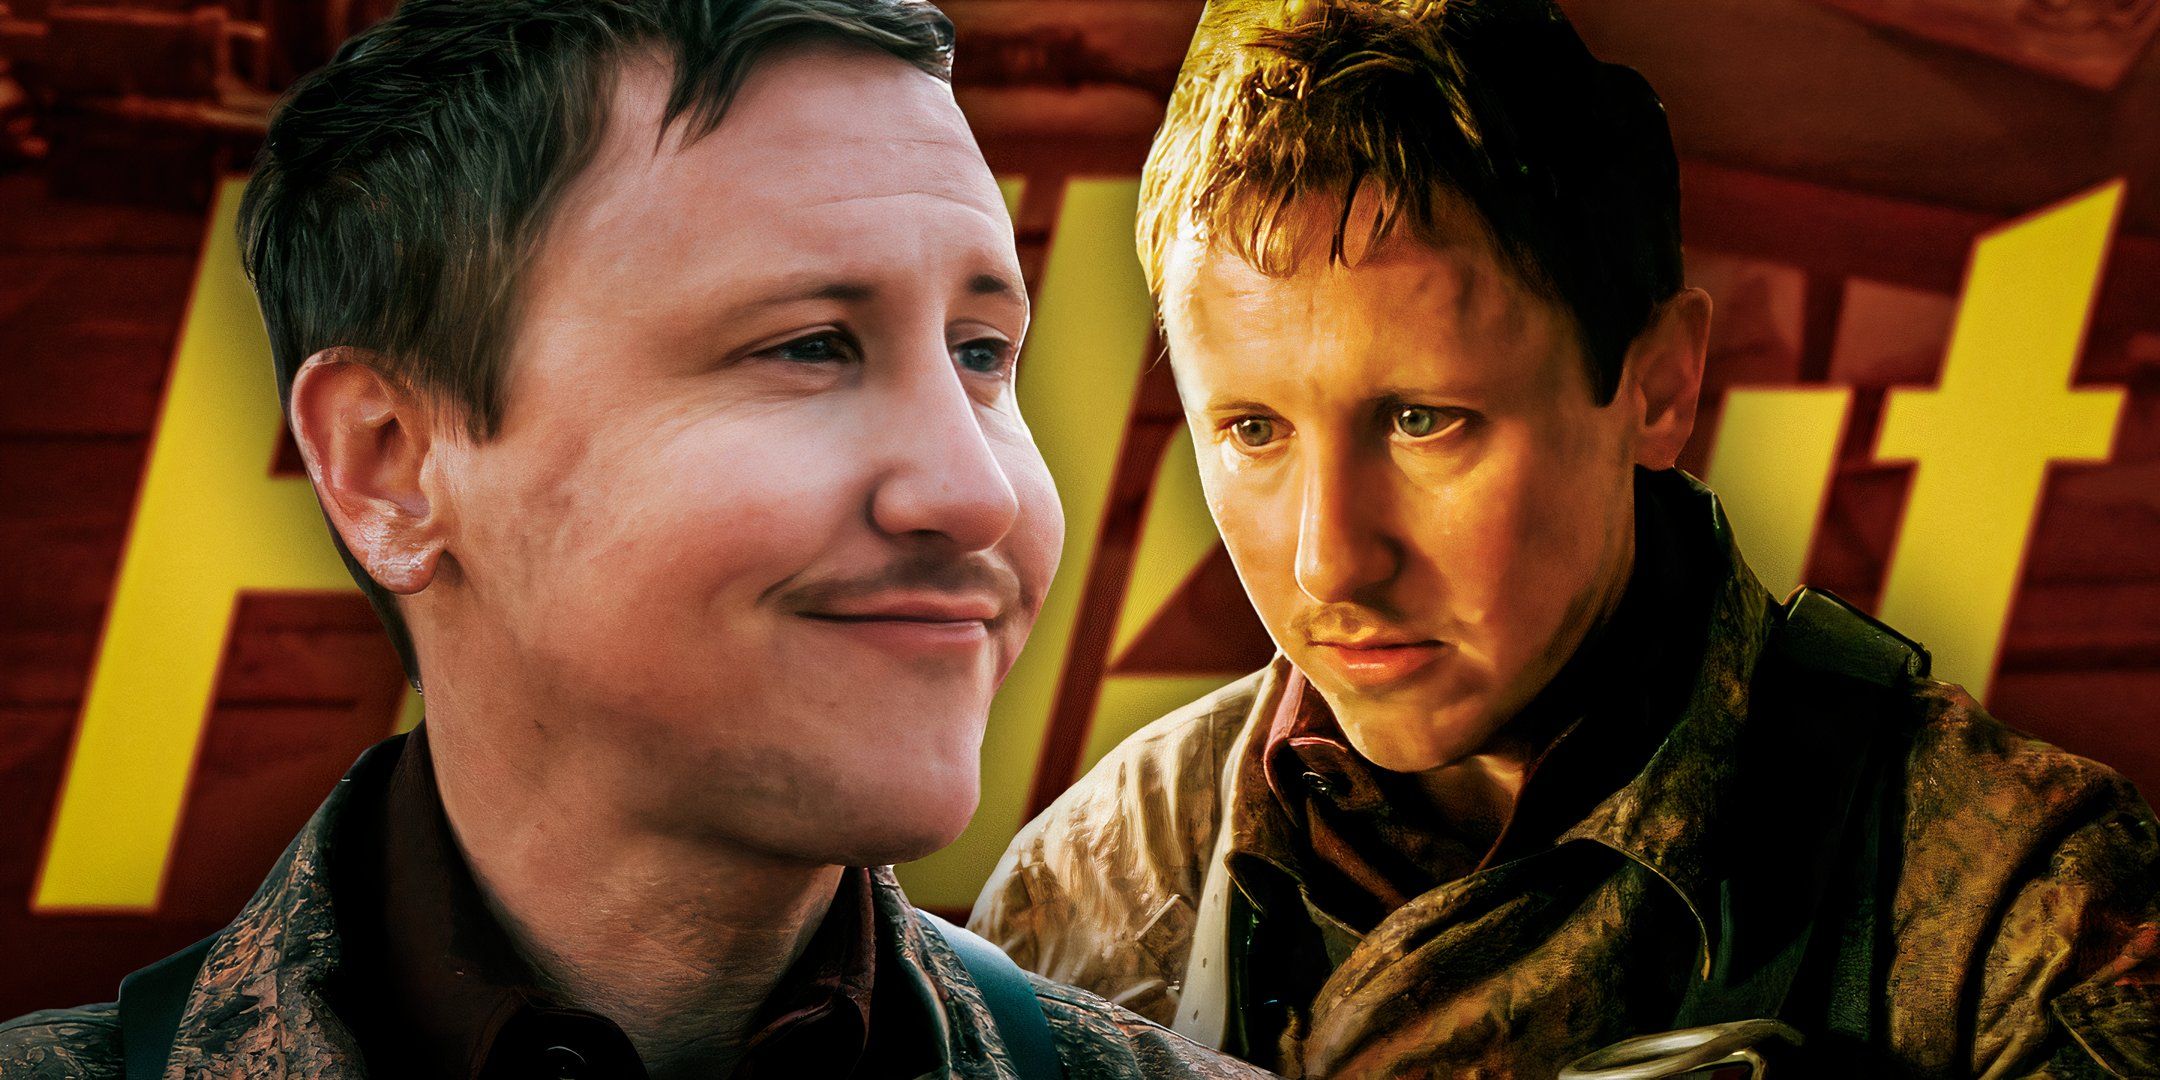 Johnny Pemberton as Thaddeus smiling and with a worried look on his face in front of the Fallout logo